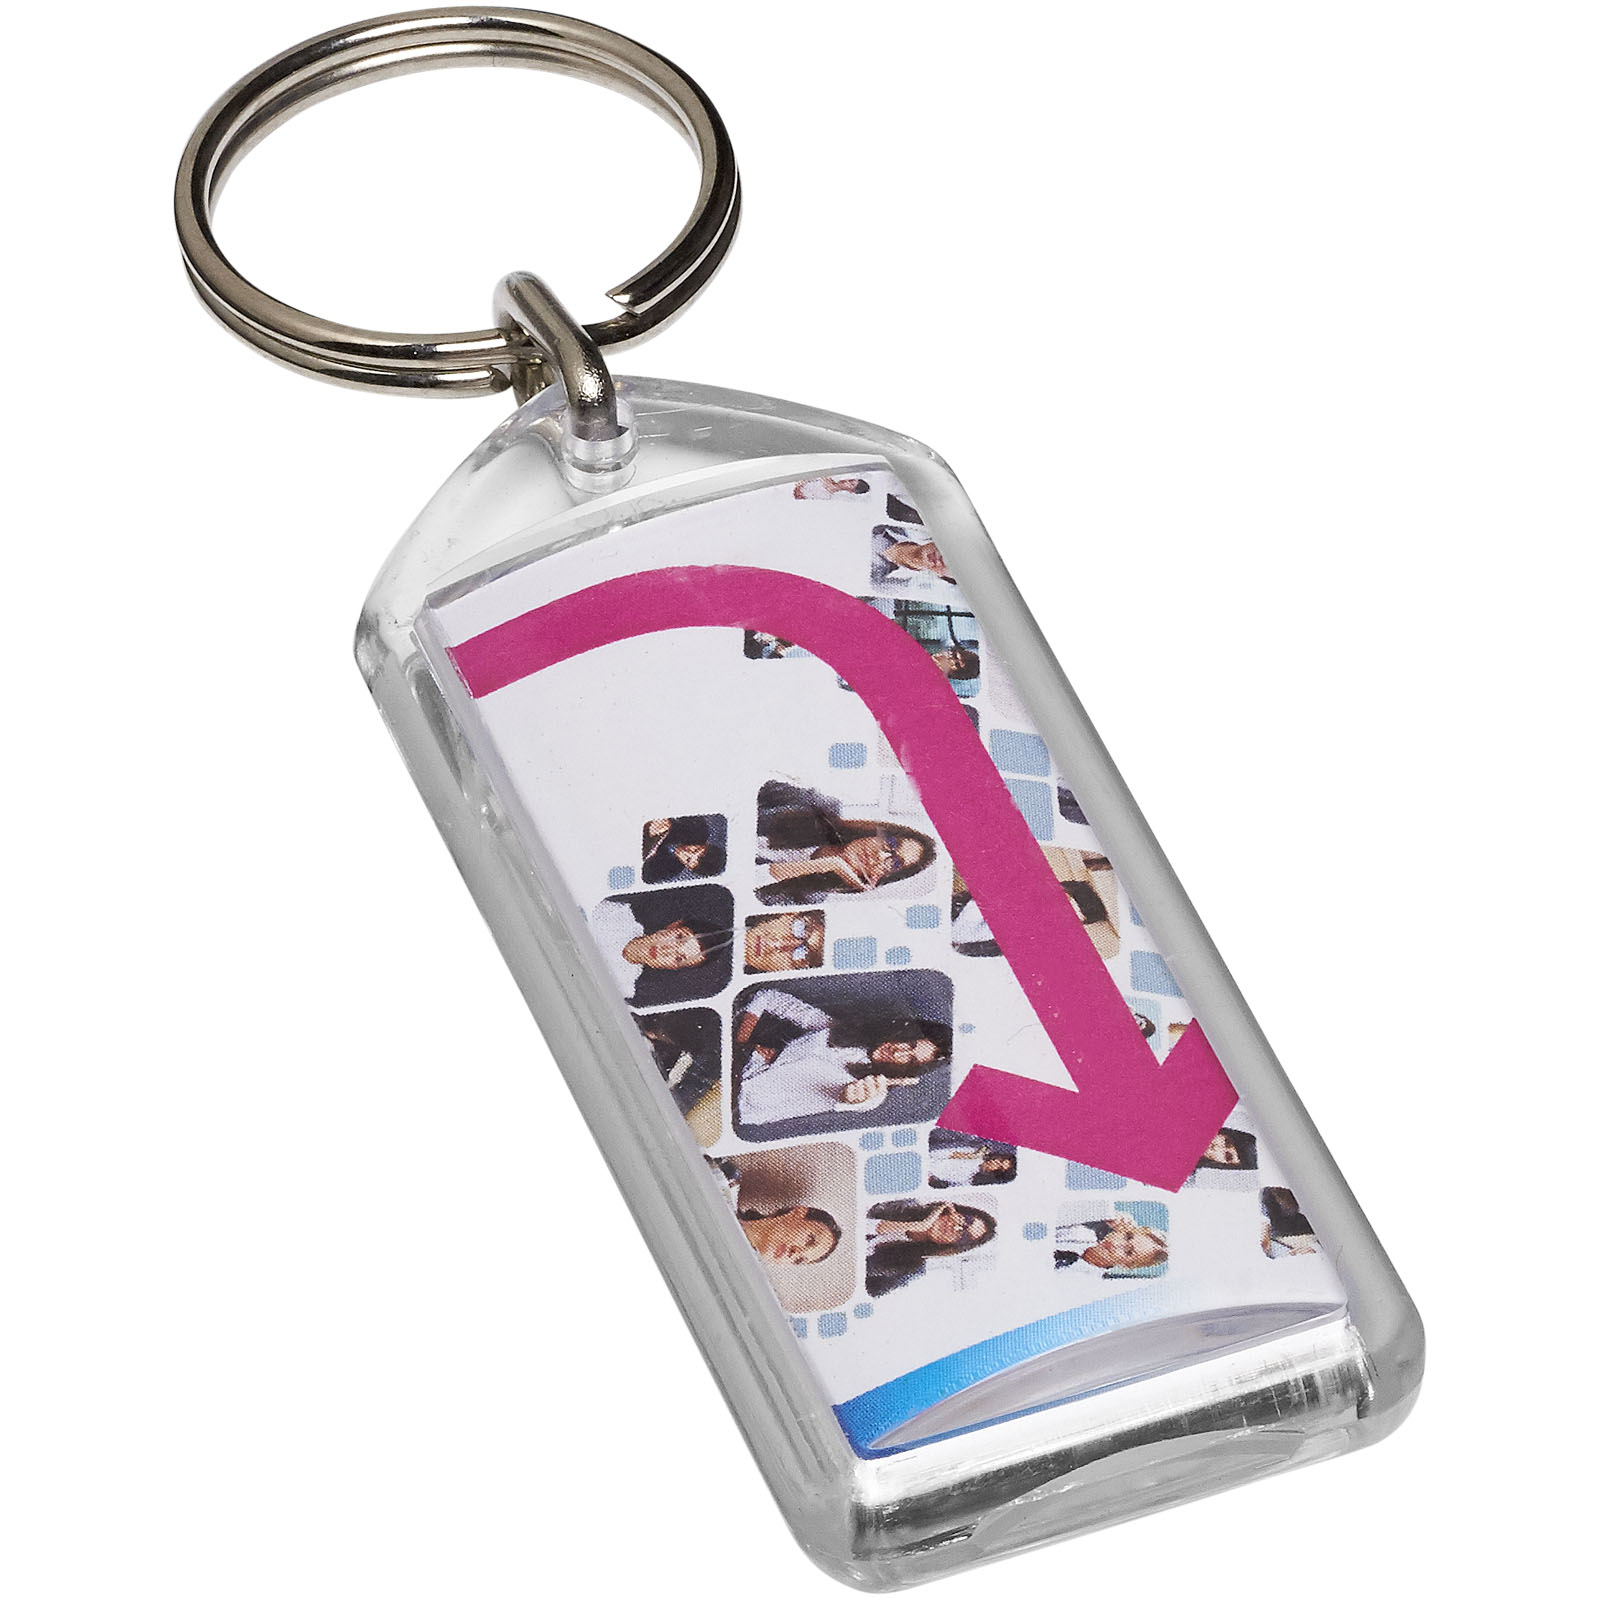 Advertising Keychains & Keyrings - Stein F1 reopenable keychain